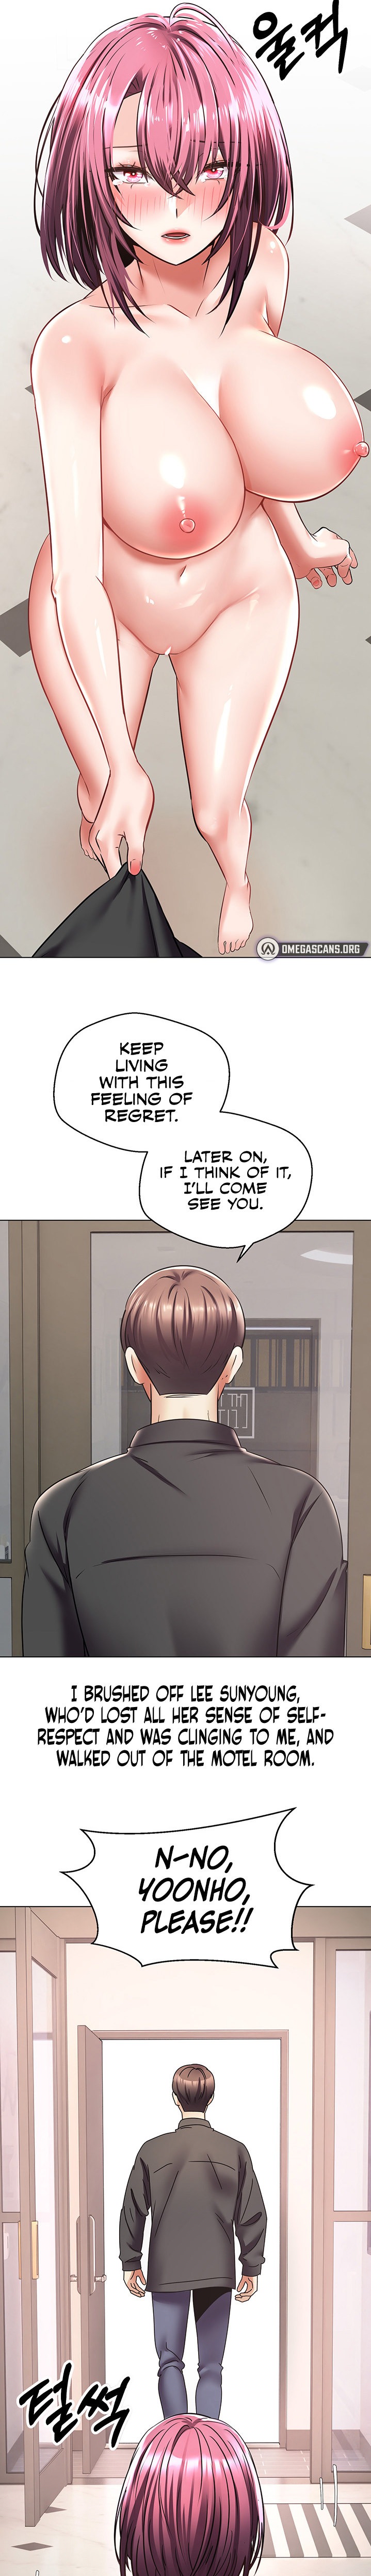 Desire Realization App - Chapter 7 Page 19